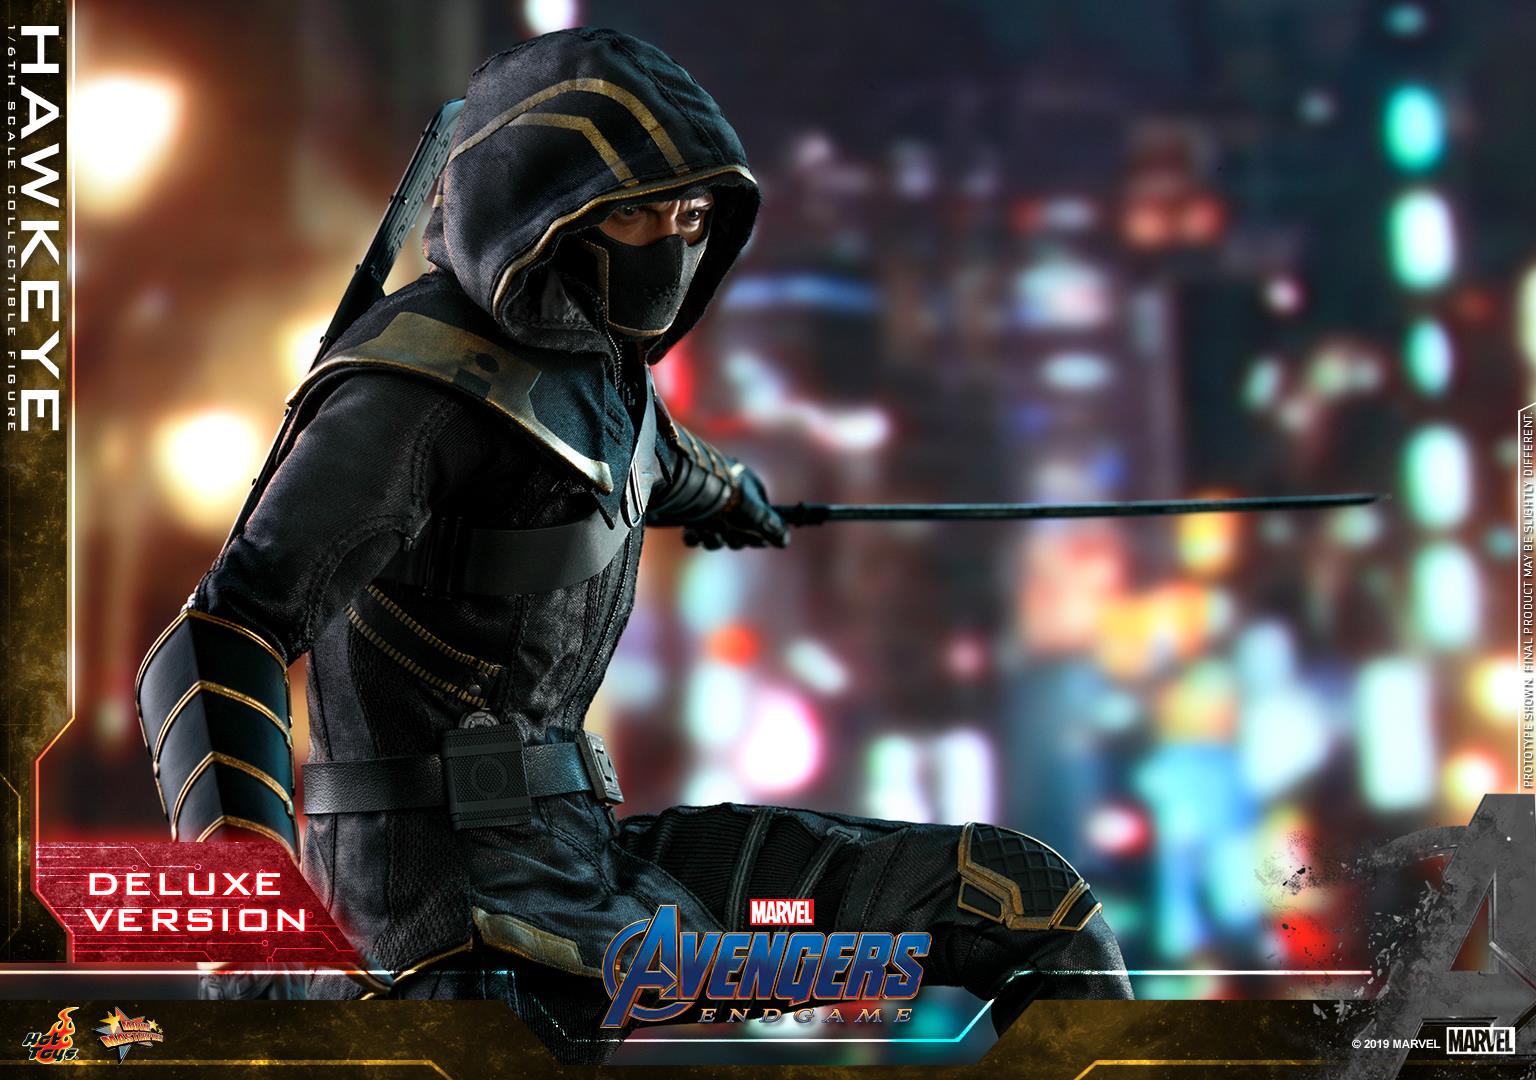 Hot Toys Reveals Their Awesome Hawkeye Ronin Action Figure For AVENGERS: ENDGAME